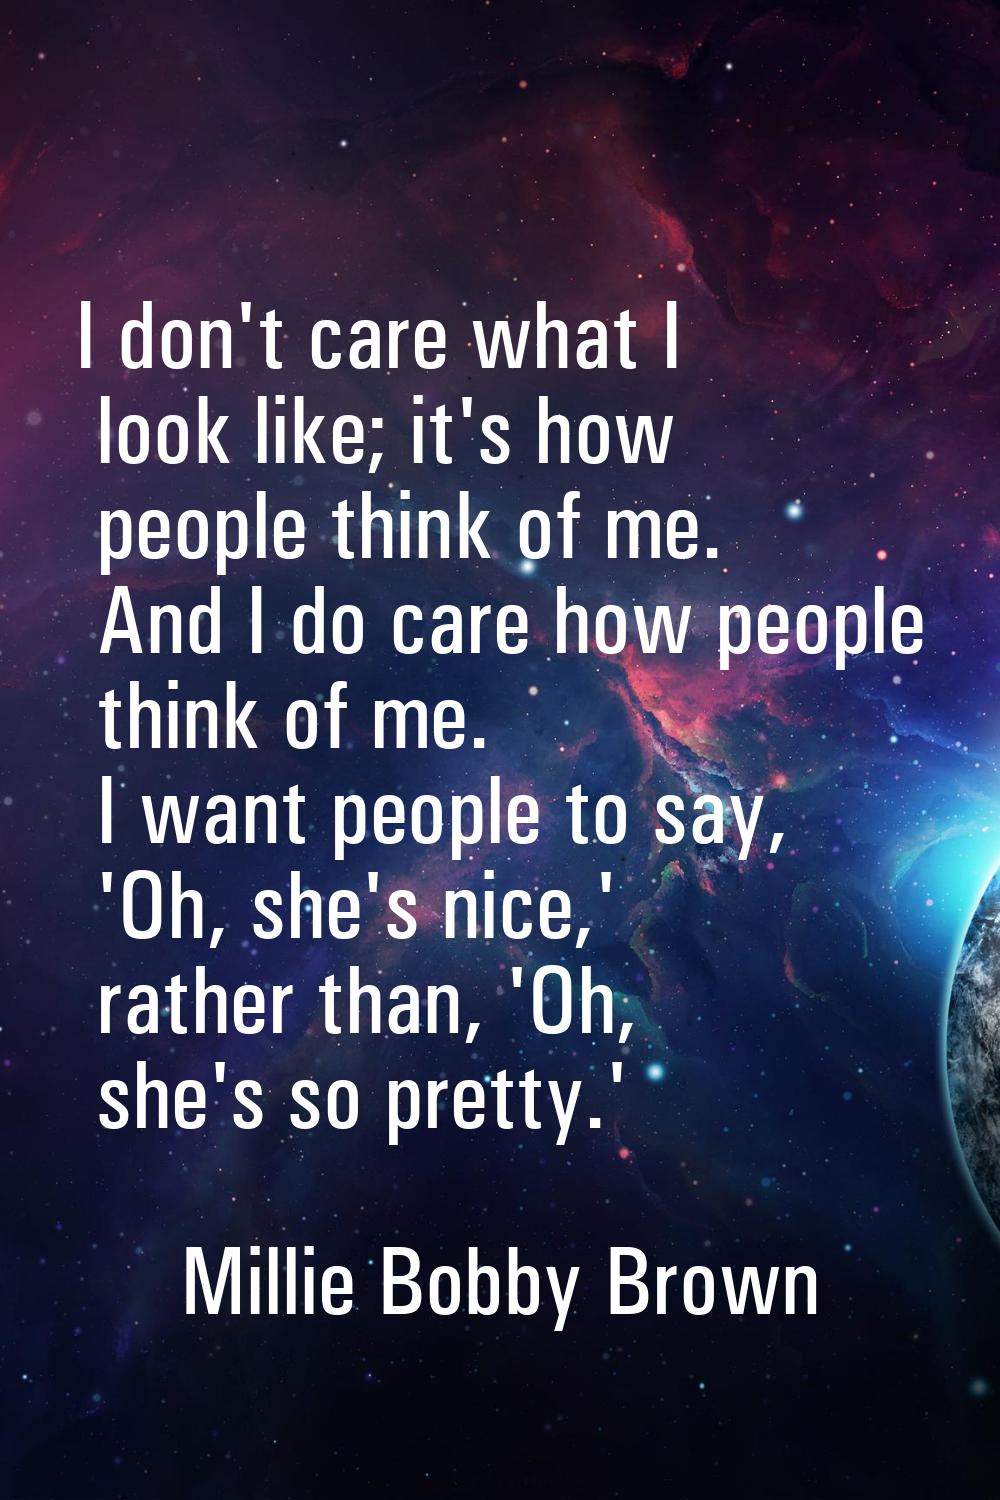 I don't care what I look like; it's how people think of me. And I do care how people think of me. I